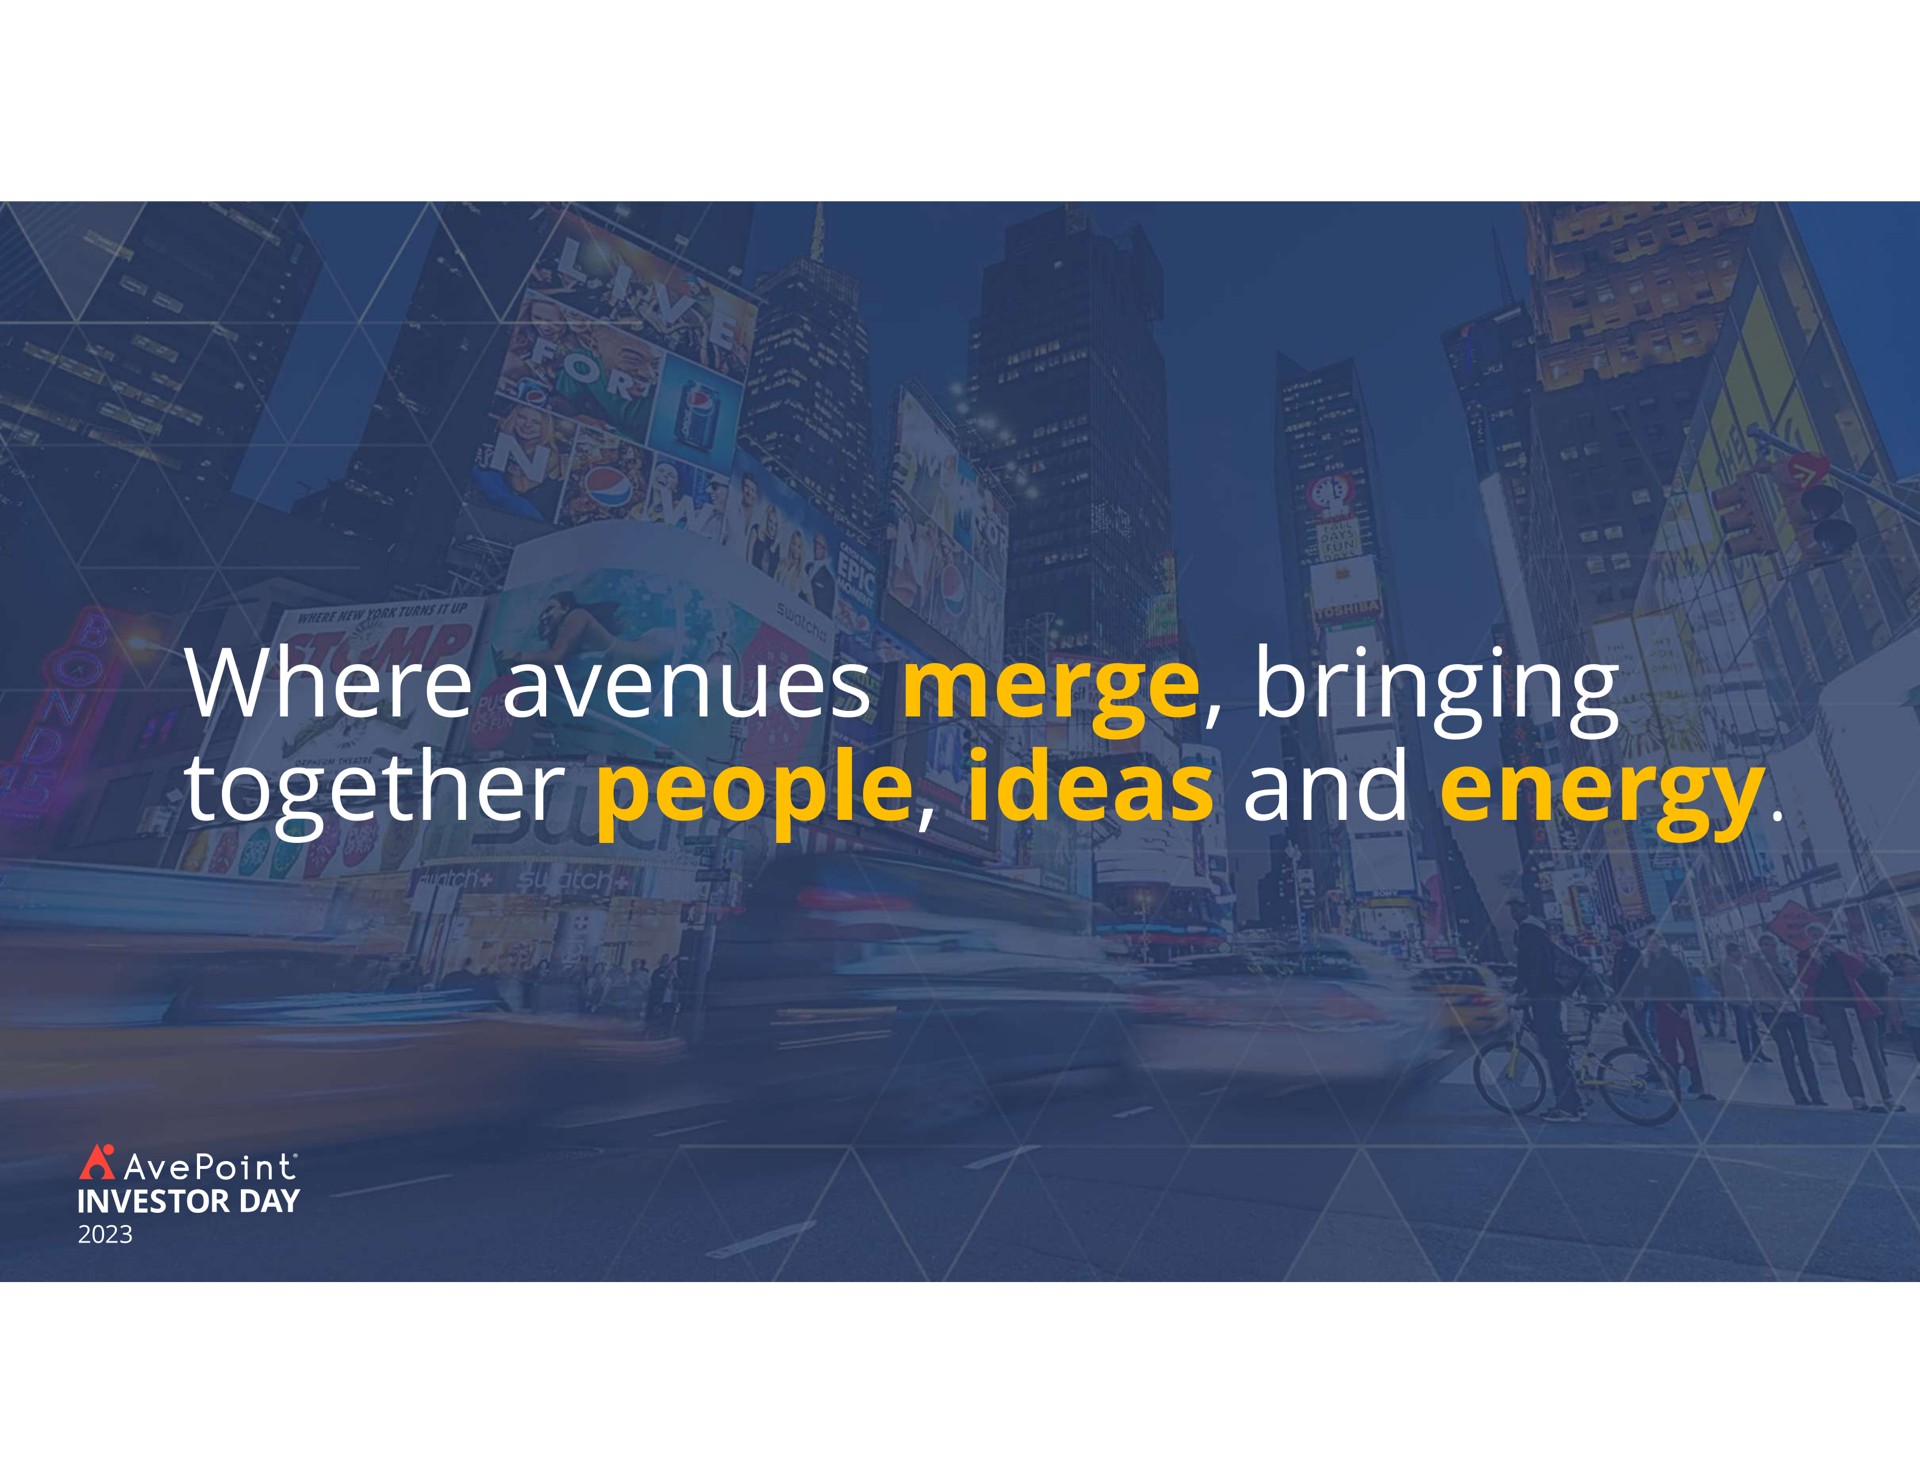 where avenues merge bringing together people ideas and energy | AvePoint